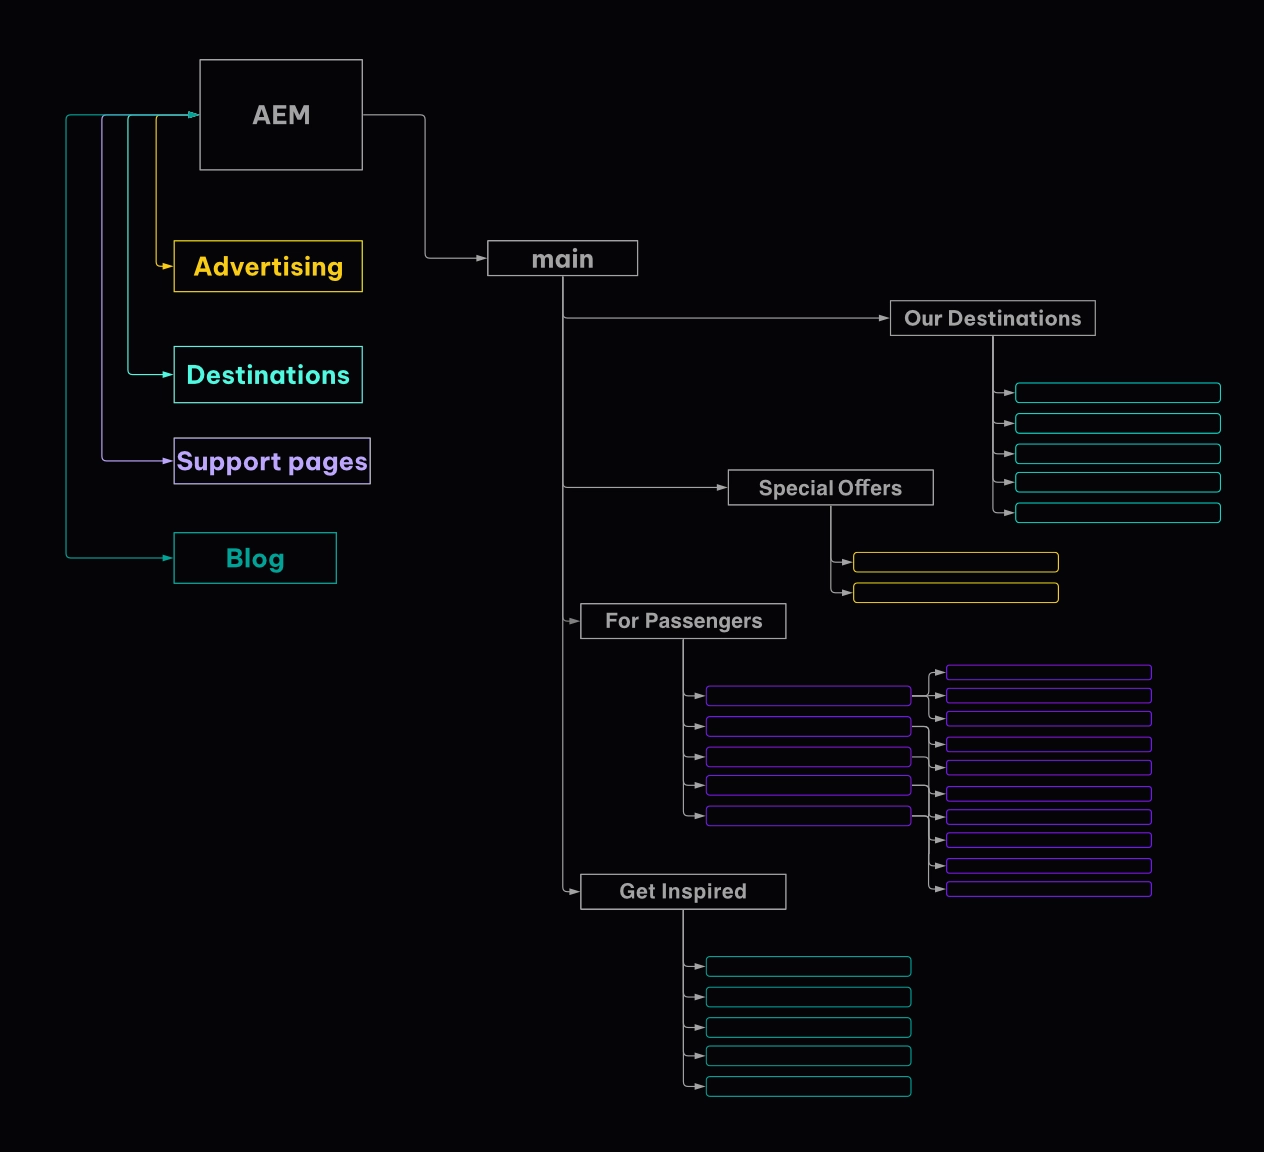 Diagram with simplified example of sitemap responsibilities with AEM